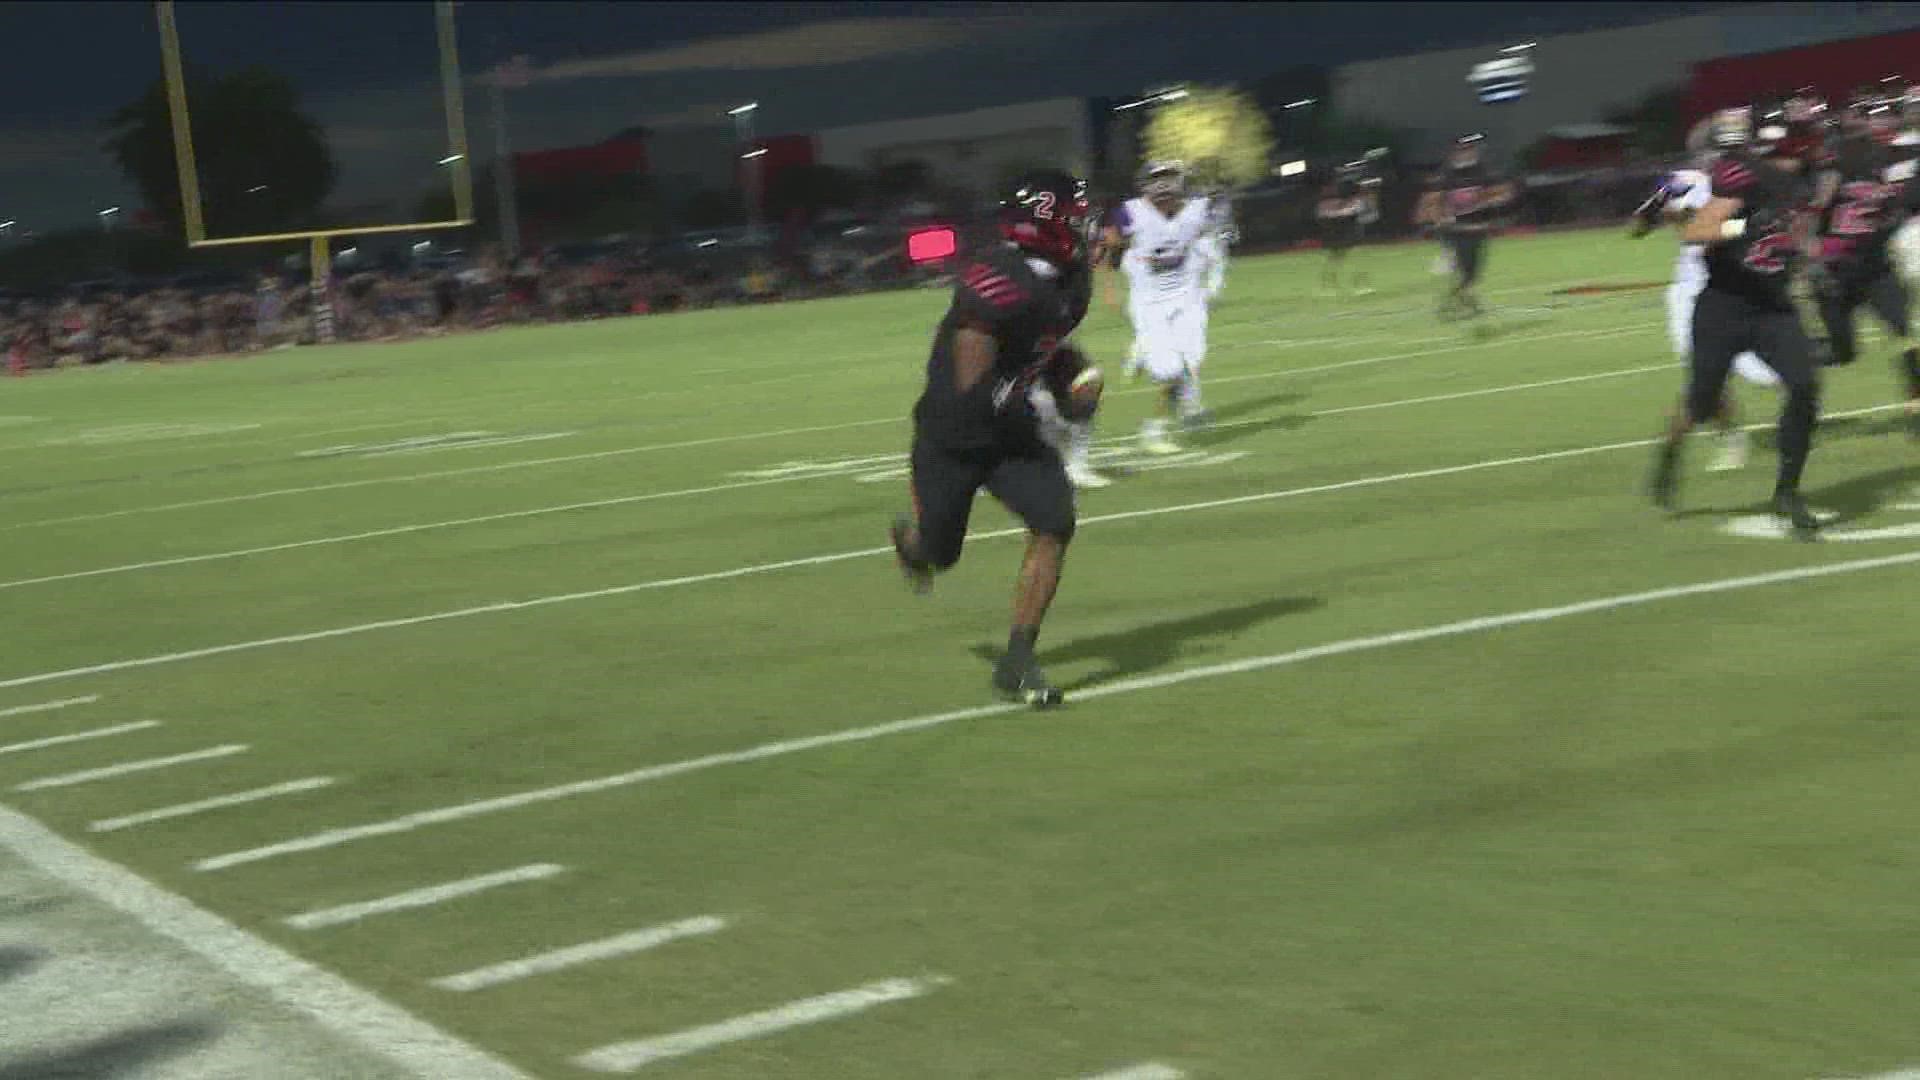 Check out highlights from the Game of the Week featuring Liberty and Sunrise Mountain.